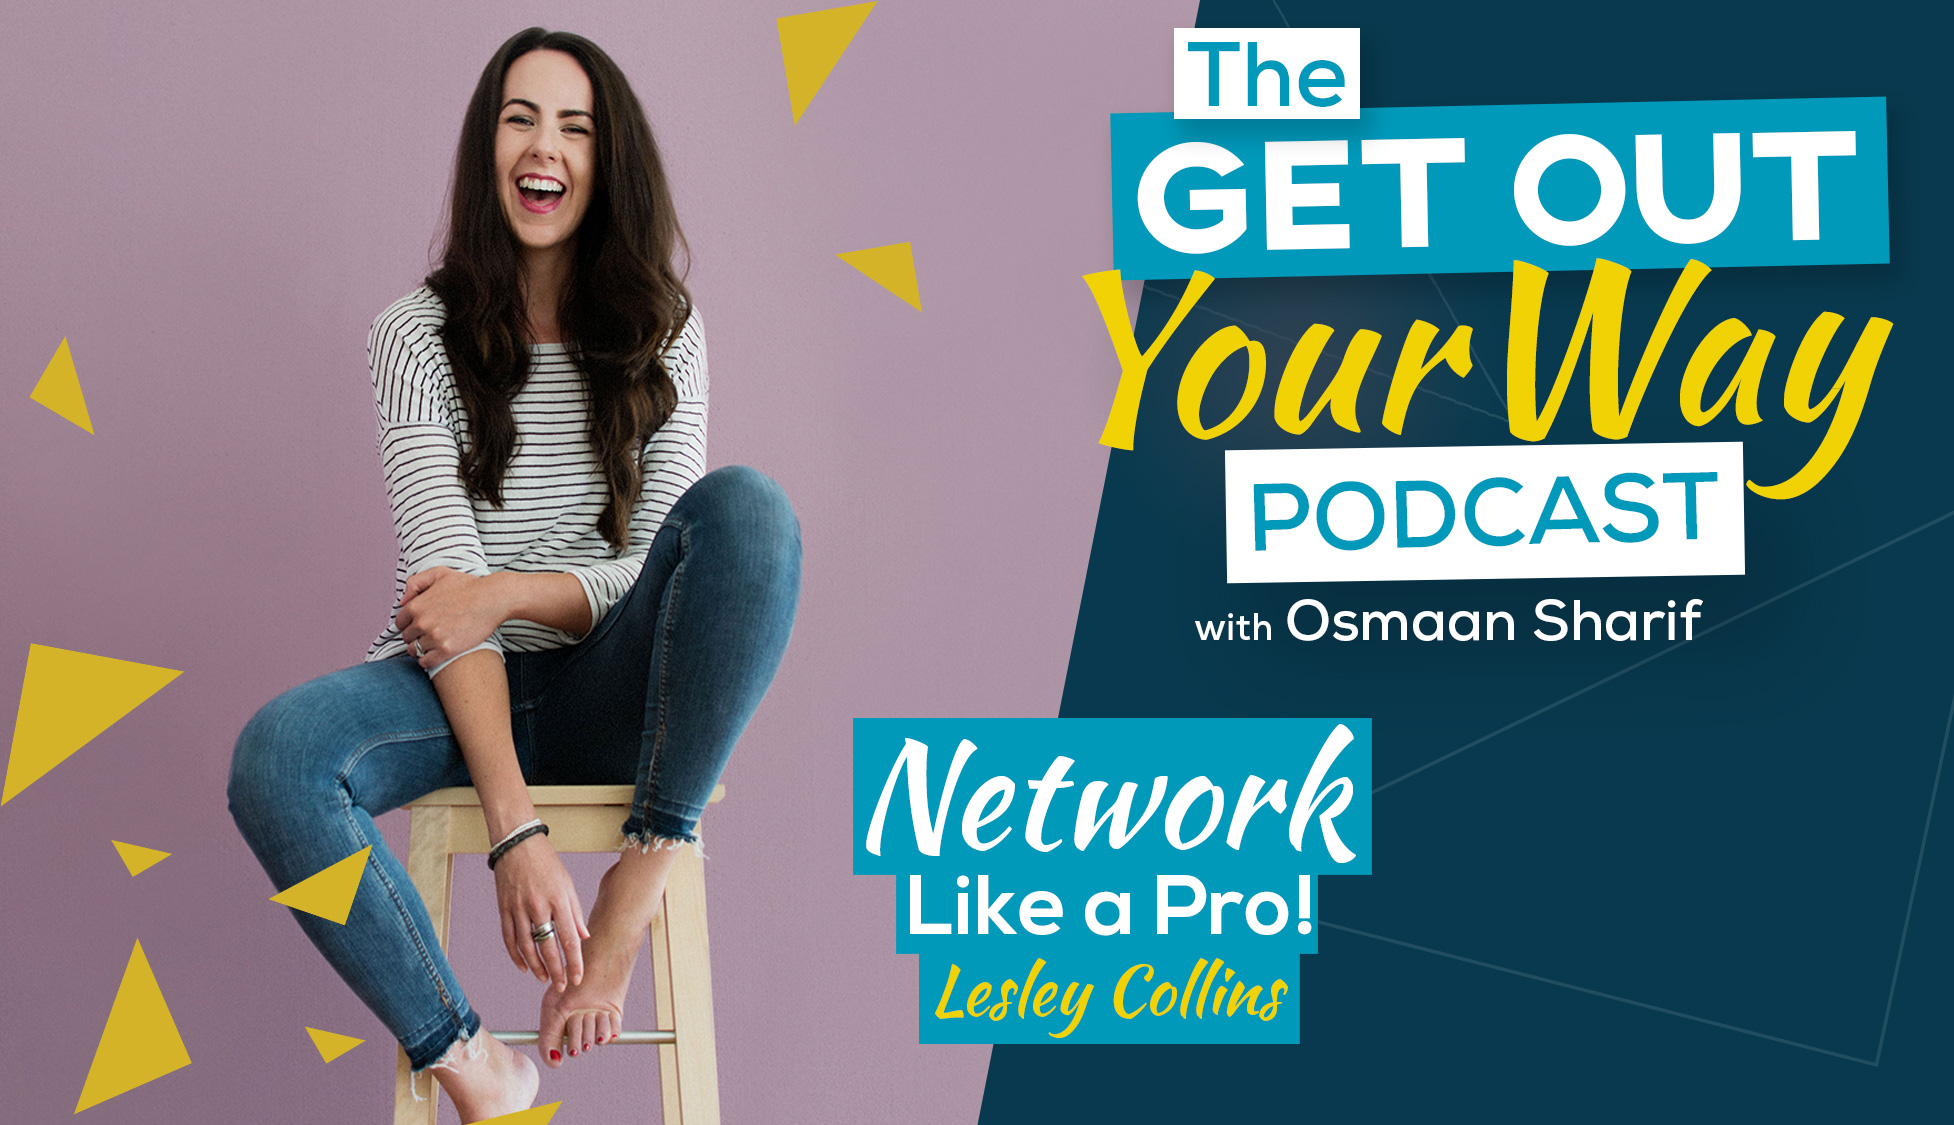 Network like a pro with Lesley Collins